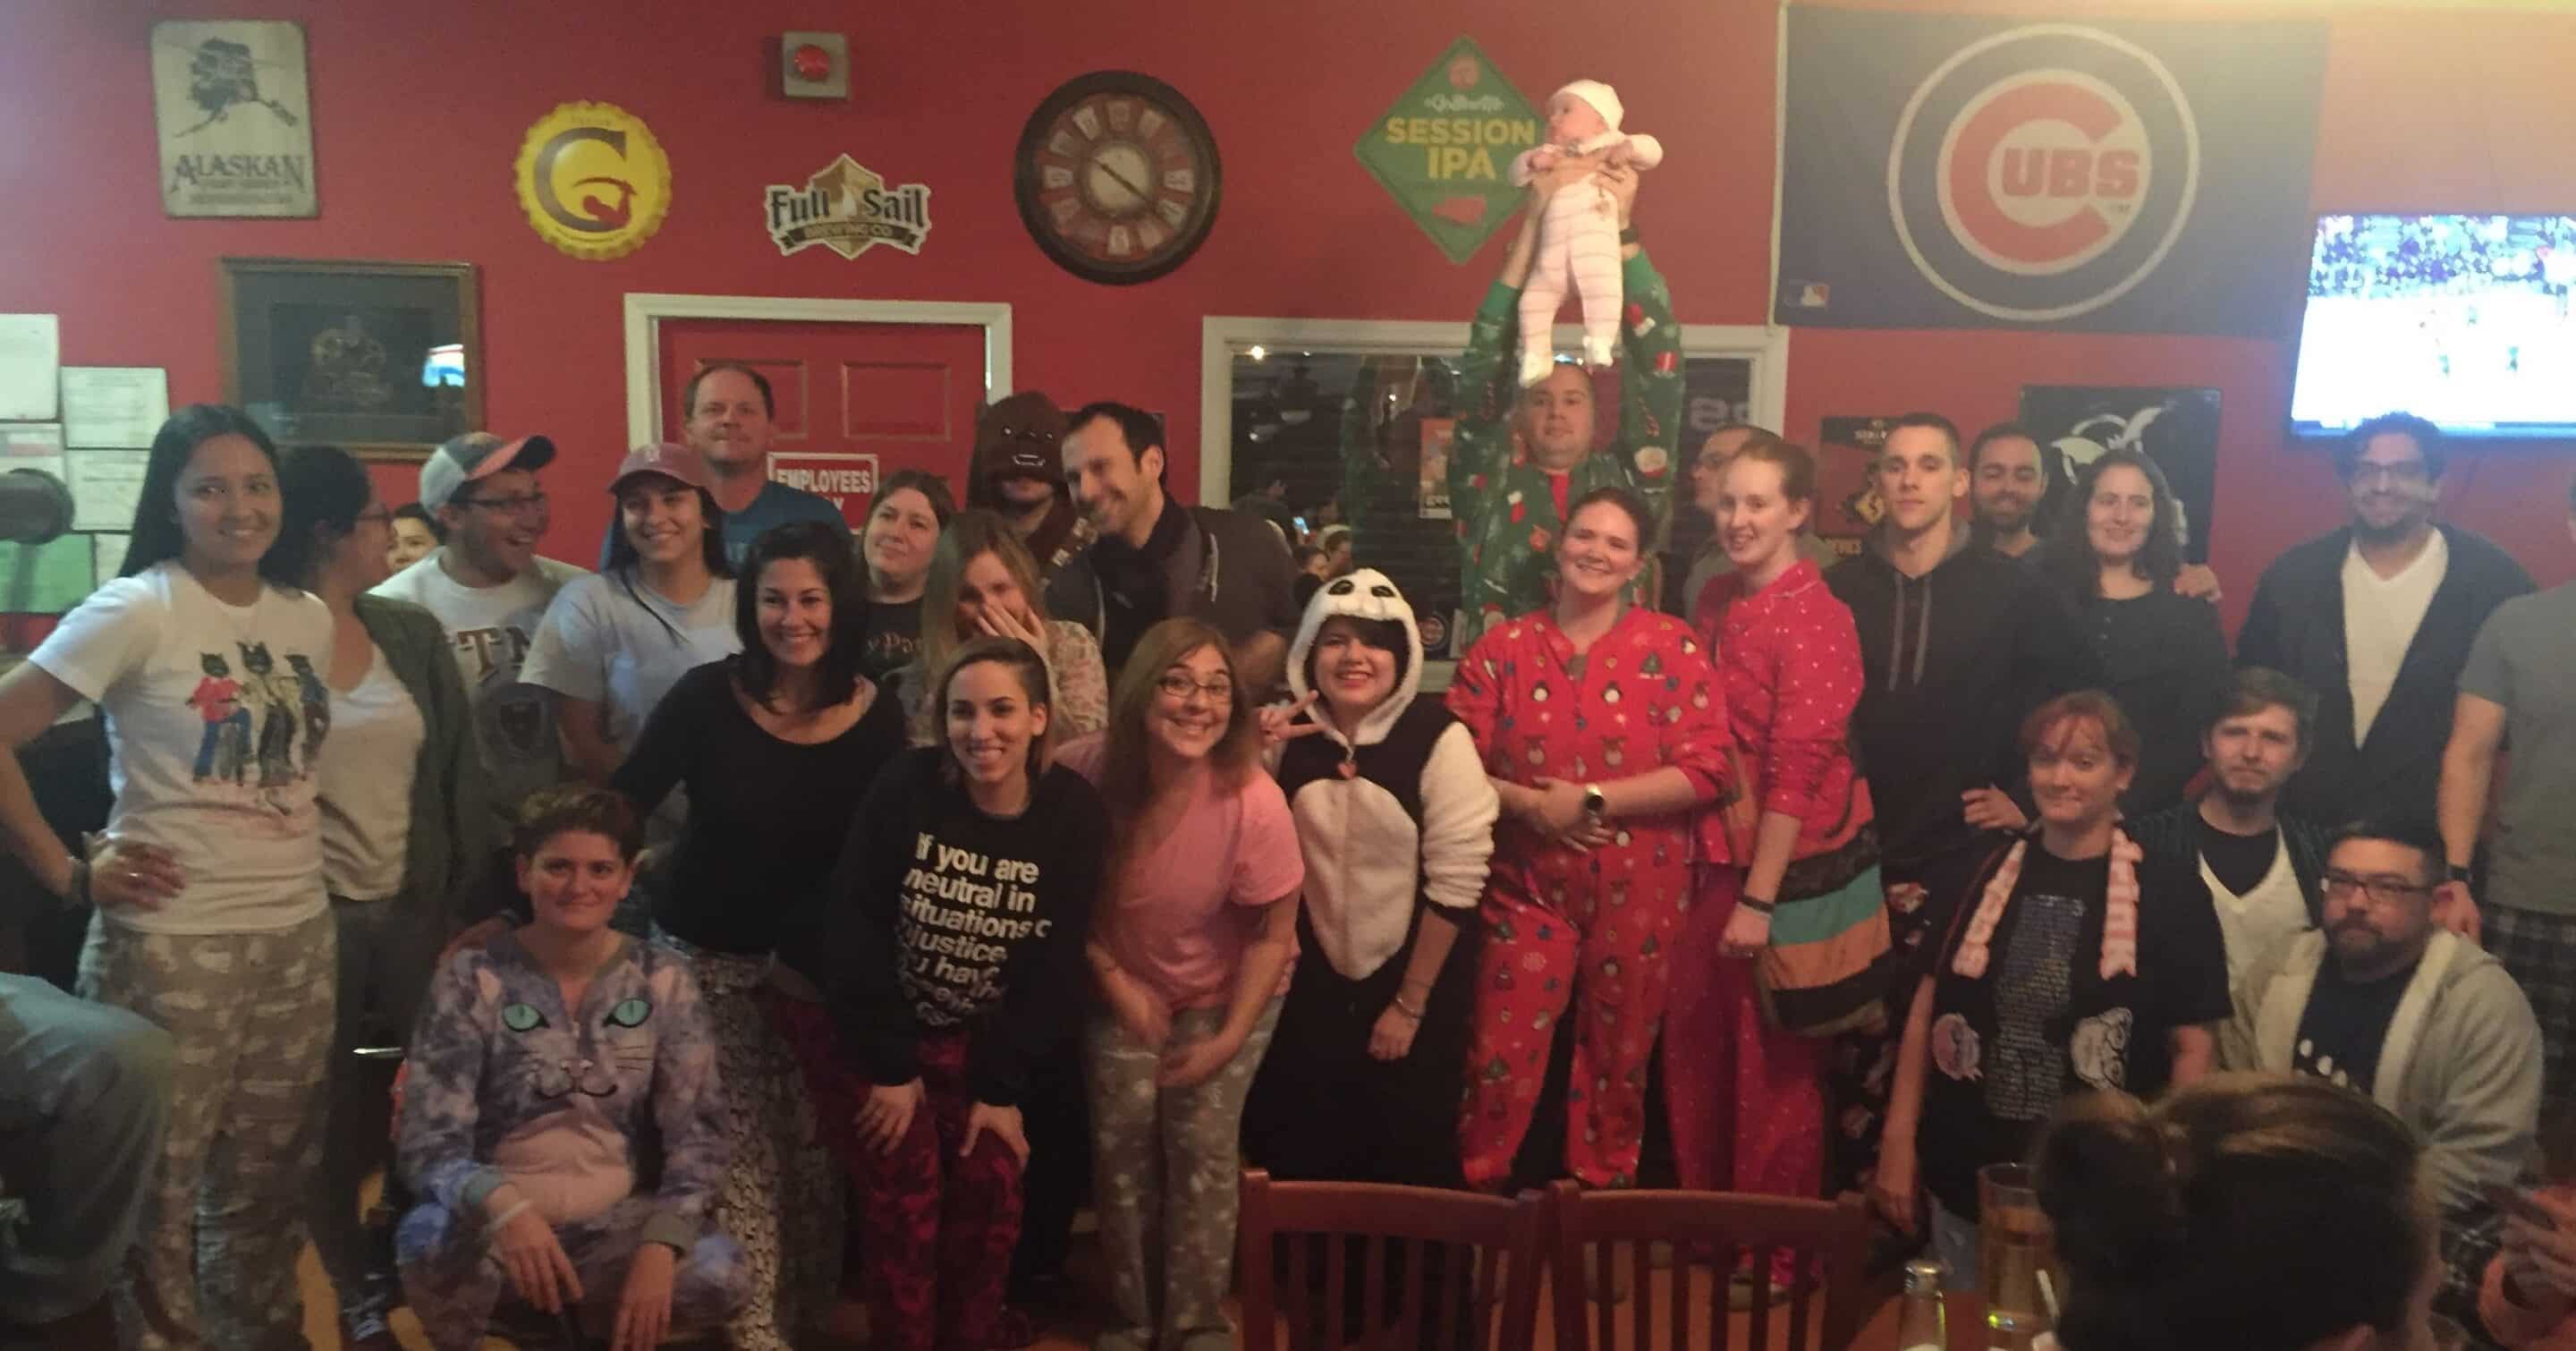 A Pajama Party at Quiz for a Cause